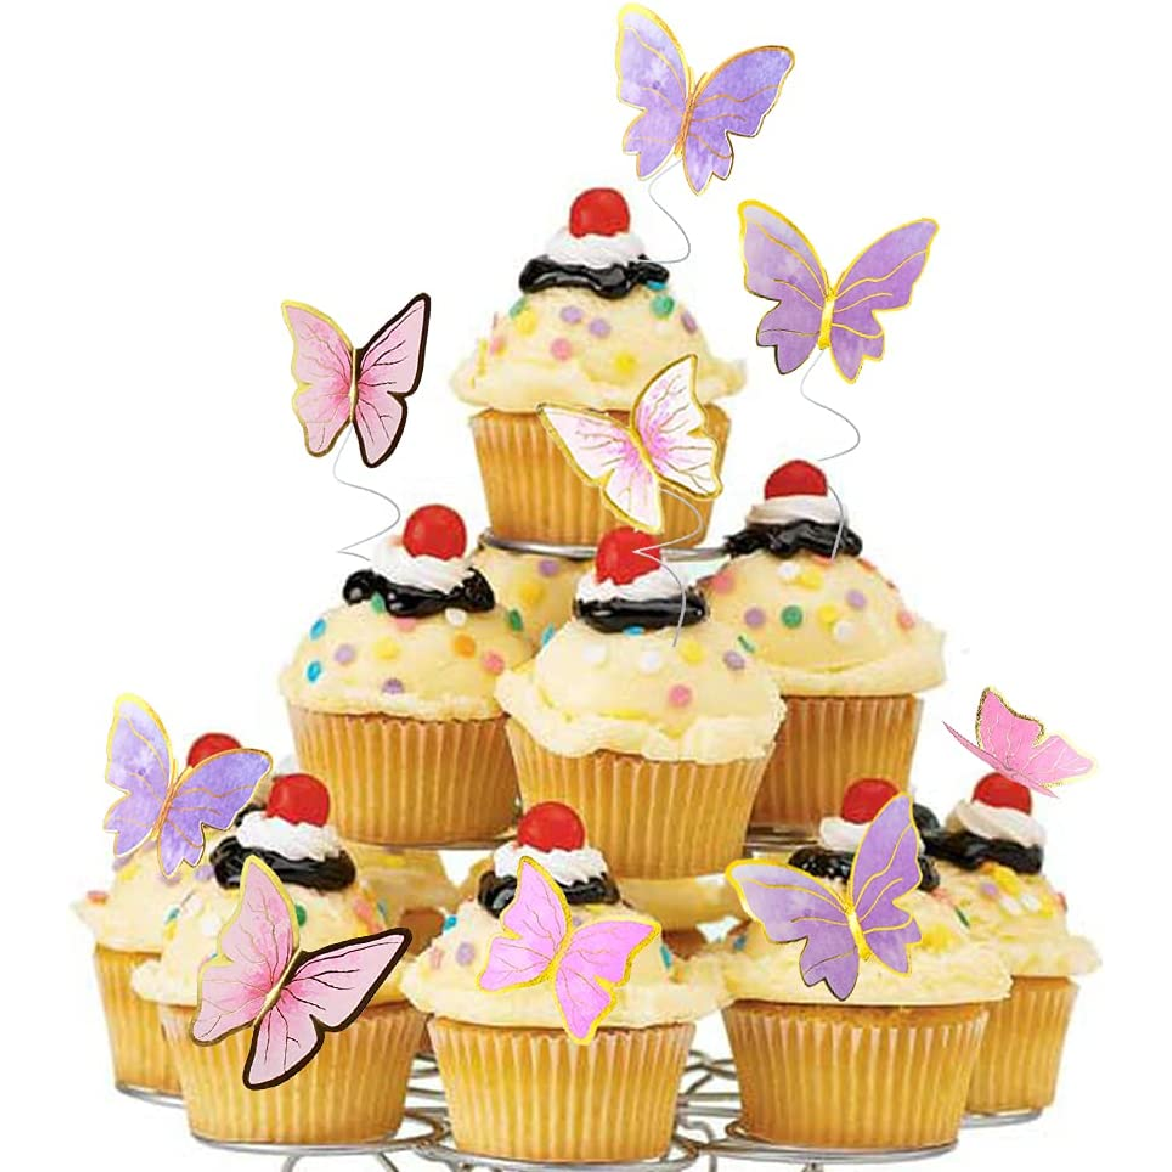 Cake Decoration, Cupcake Topper -3D Butterflies, purple - pack of 10 - Rampant Coffee Company